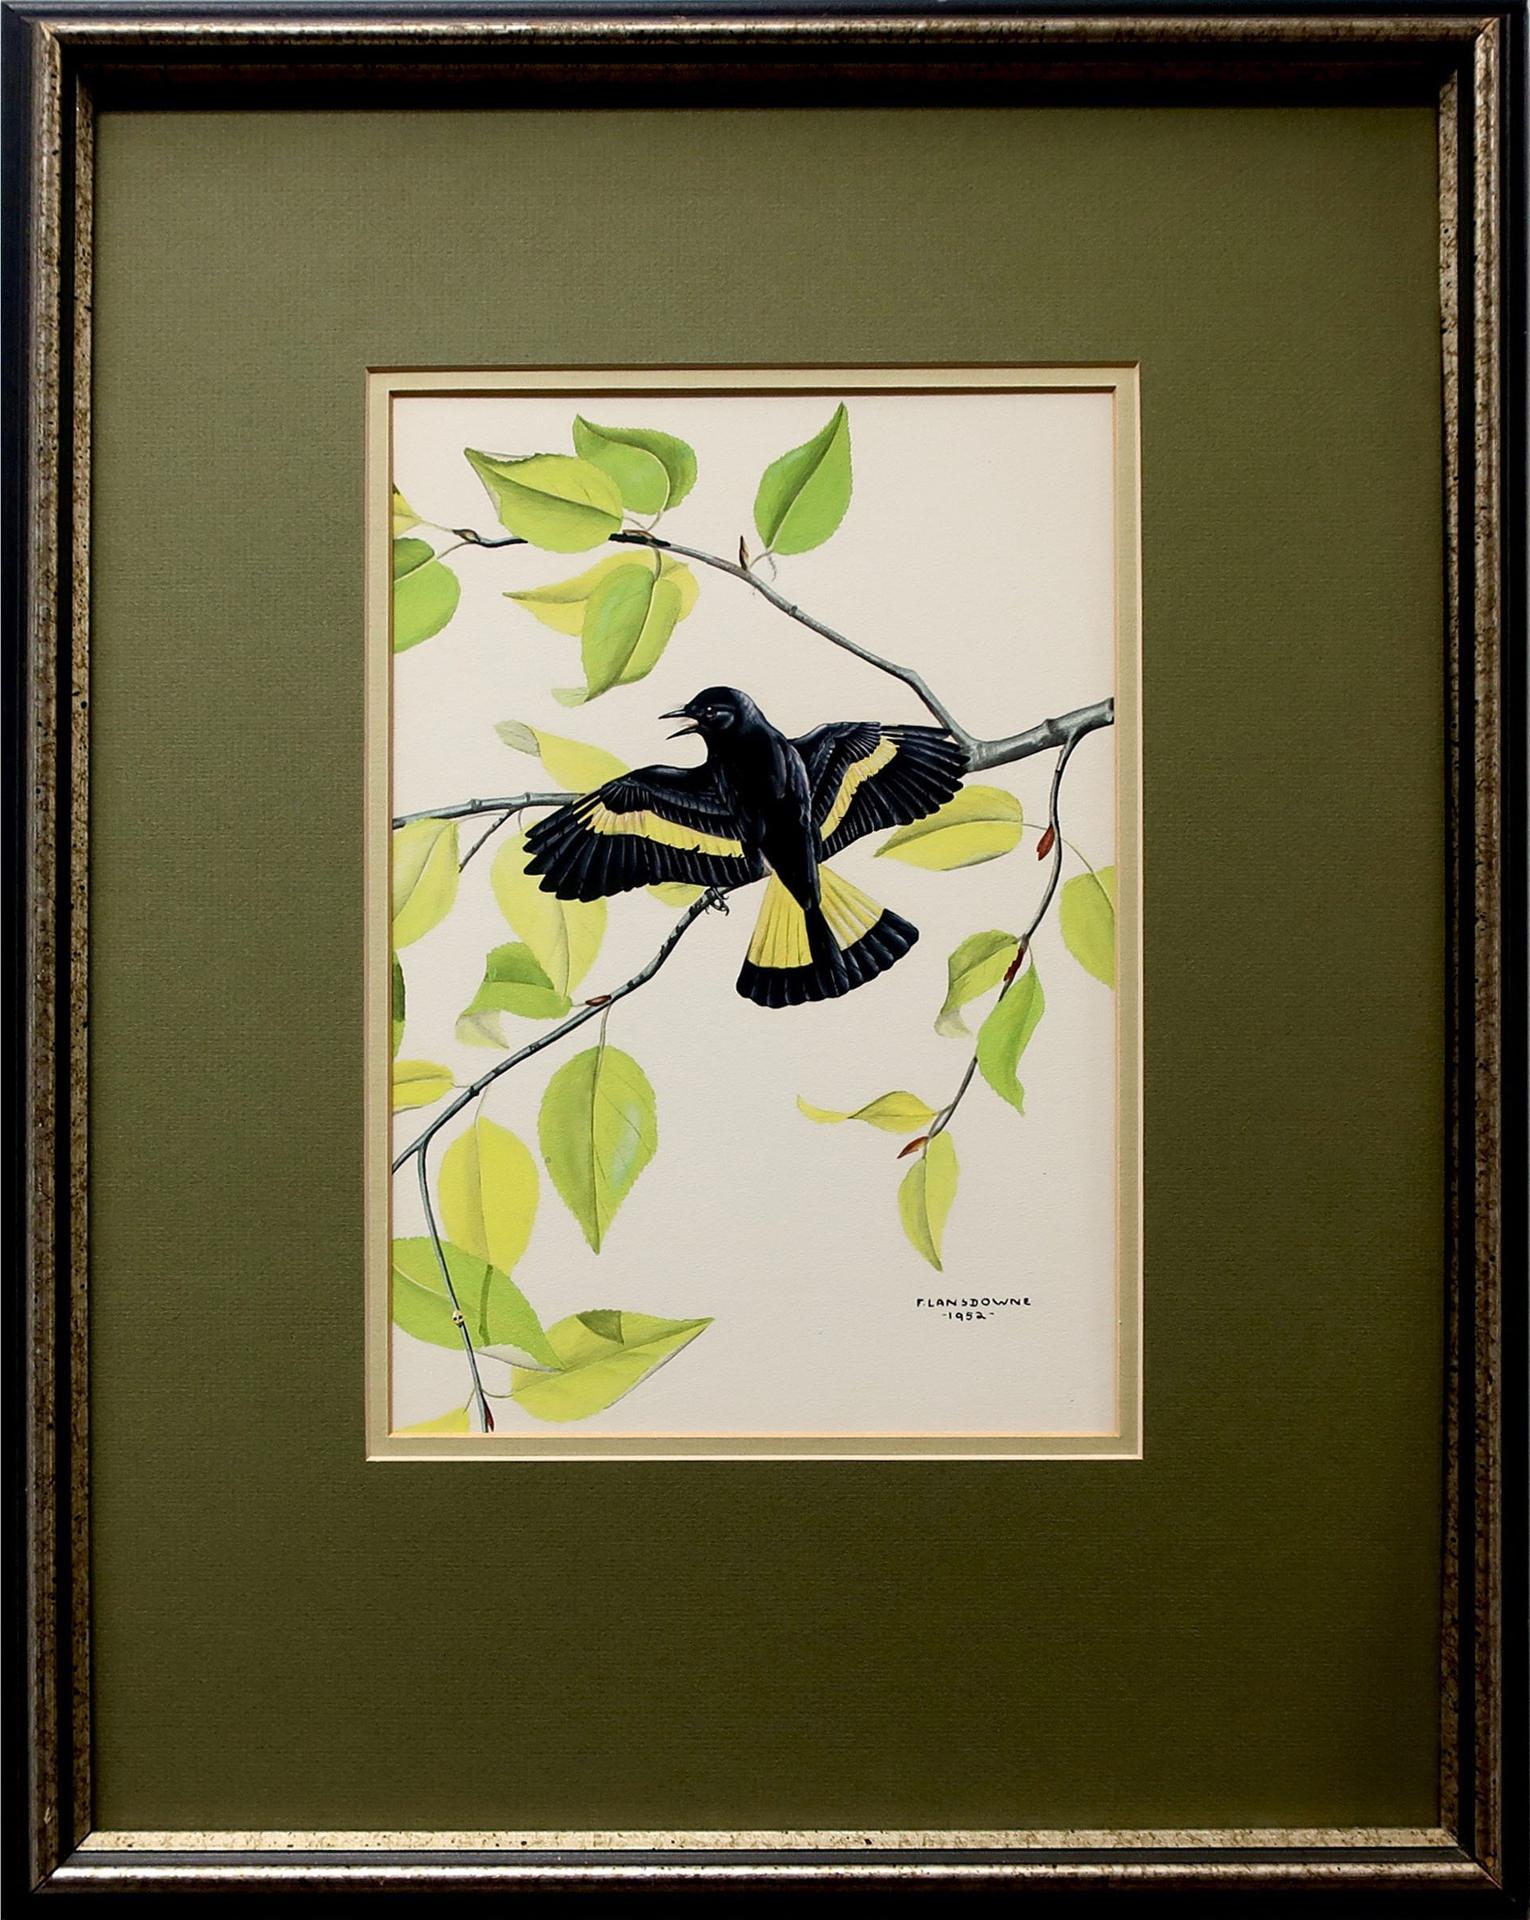 James Fenwick Lansdowne (1937-2008) - Untitled (Black Bird With Yellow Striped Wings And Tail)